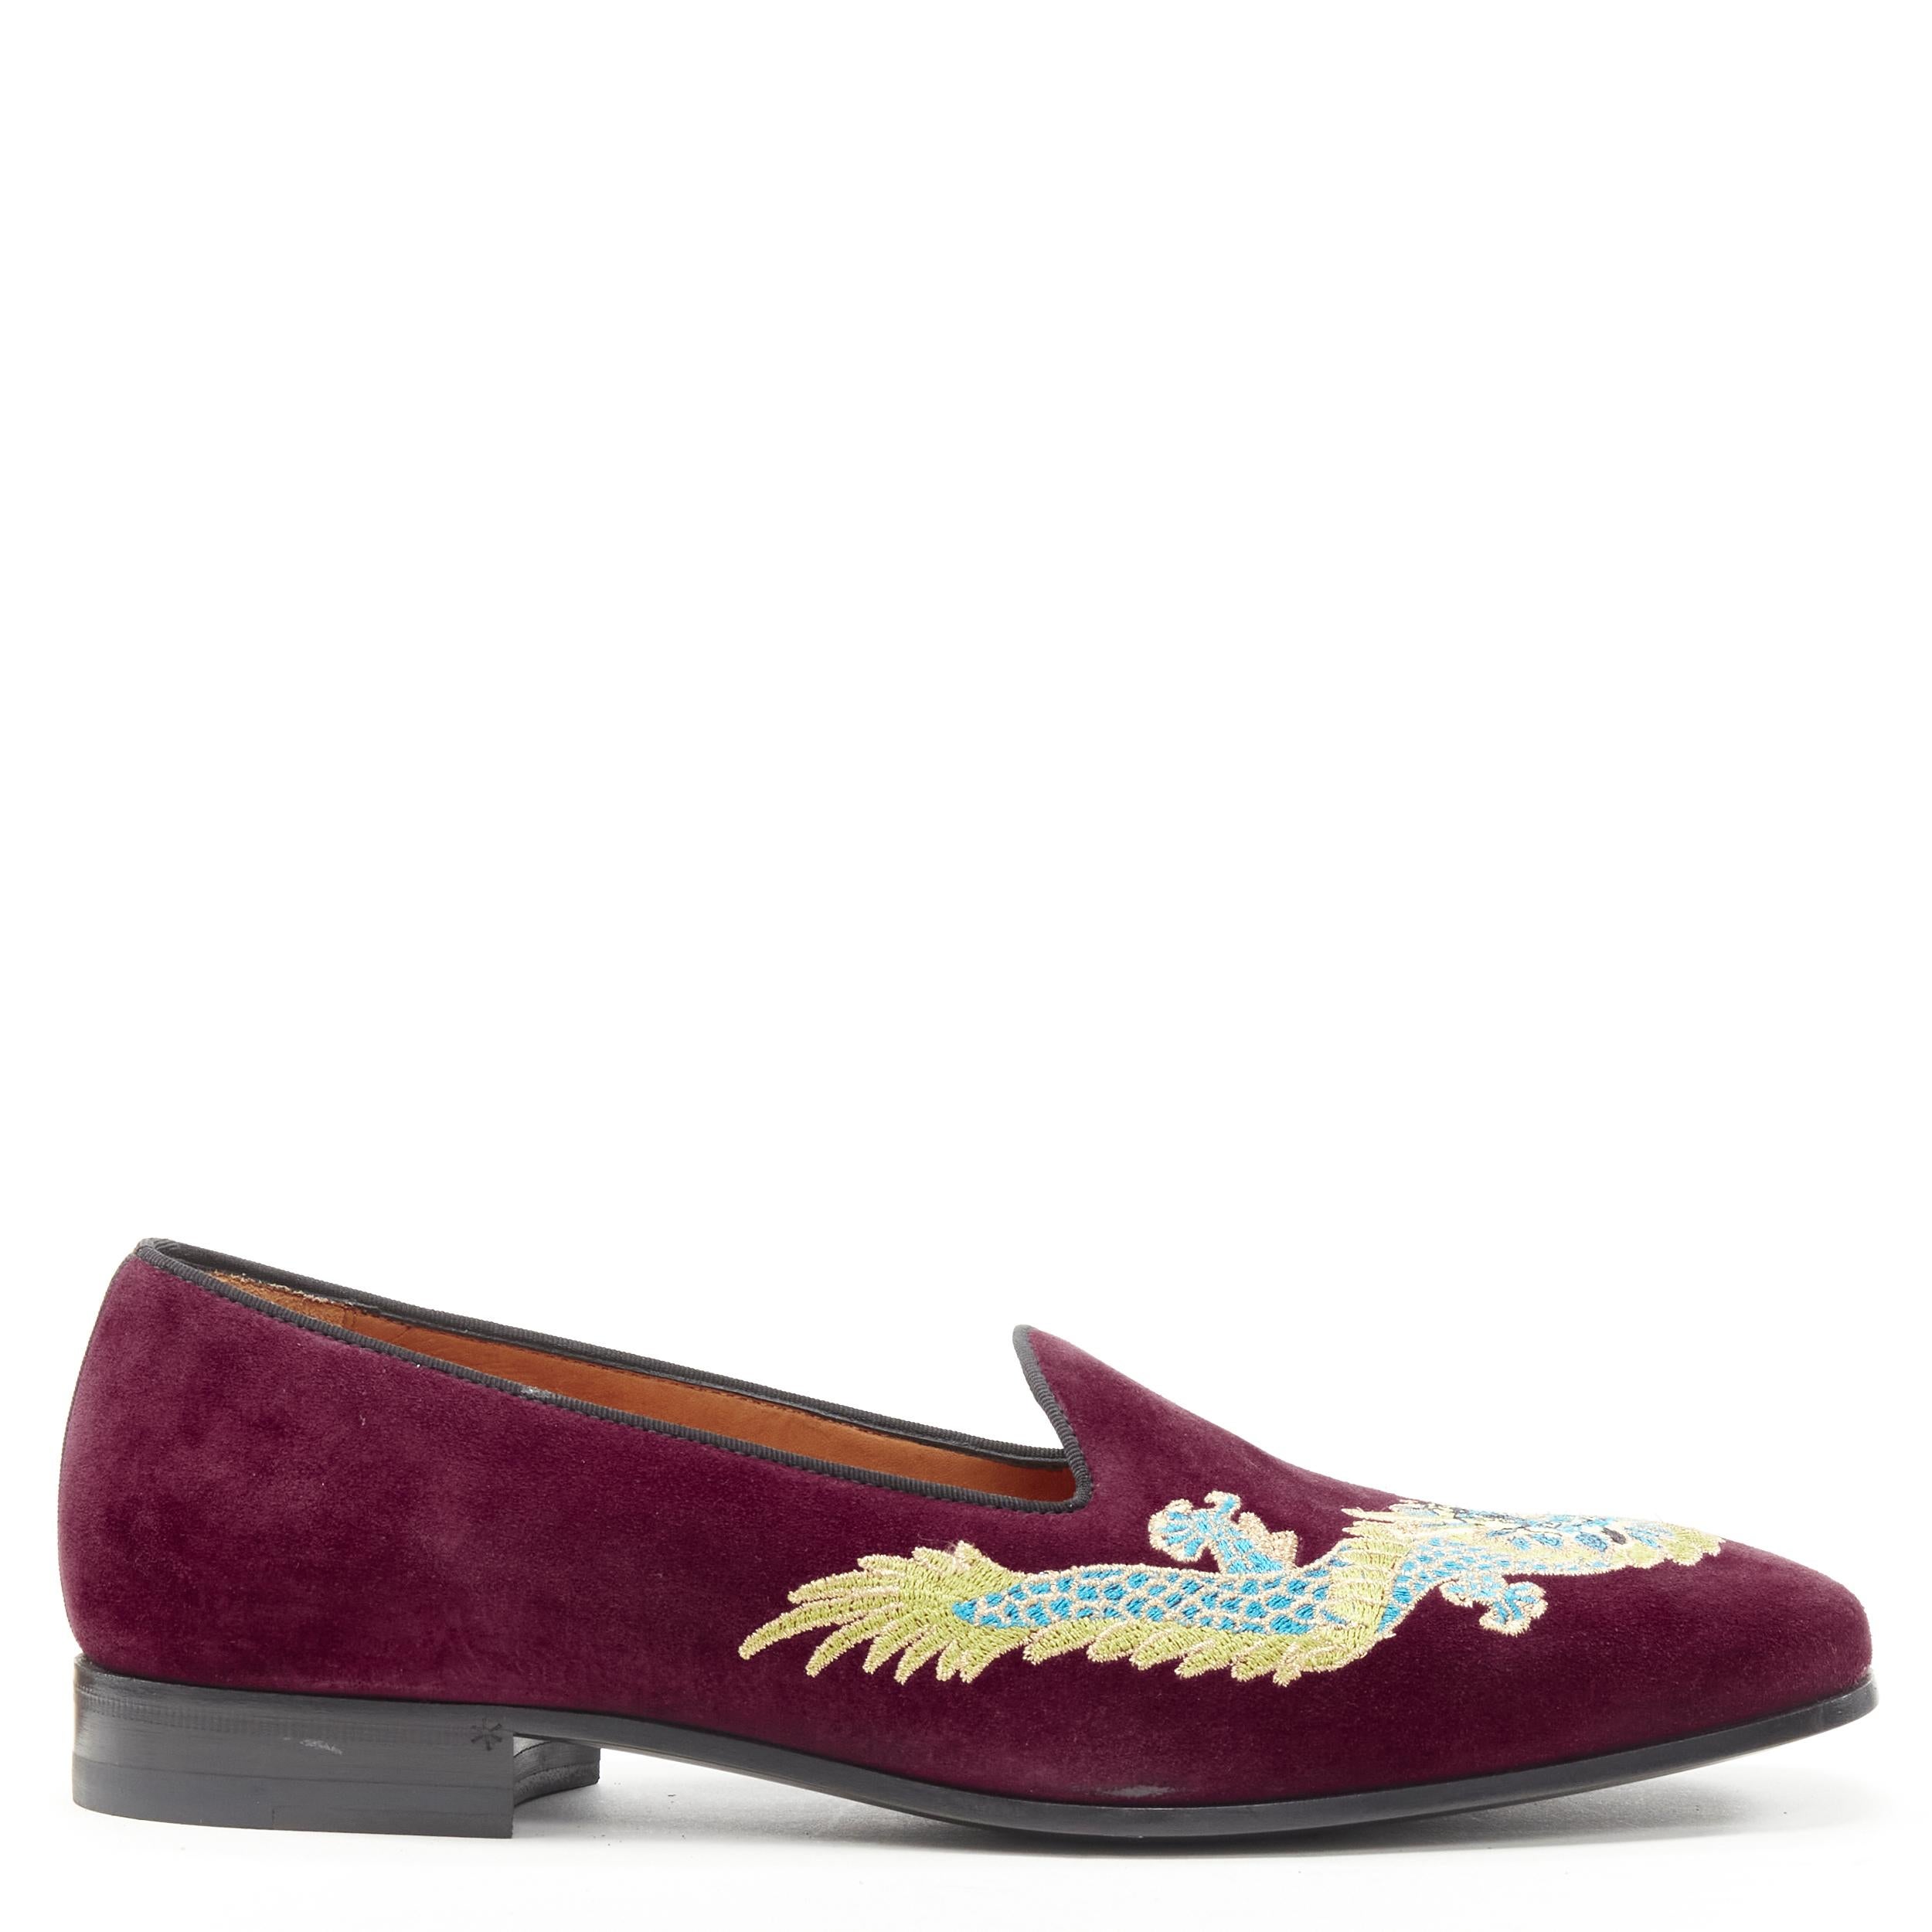 new GUCCI Oriental Dragon embroidered burgundy suede laofer UK7 US8 EU41 
Reference: TGAS/B02178 
Brand: Gucci 
Designer: Alessandro Michele 
Material: Suede 
Color: Burgundy 
Pattern: Solid 
Extra Detail: Burgundy red suede leather upper. Gold and